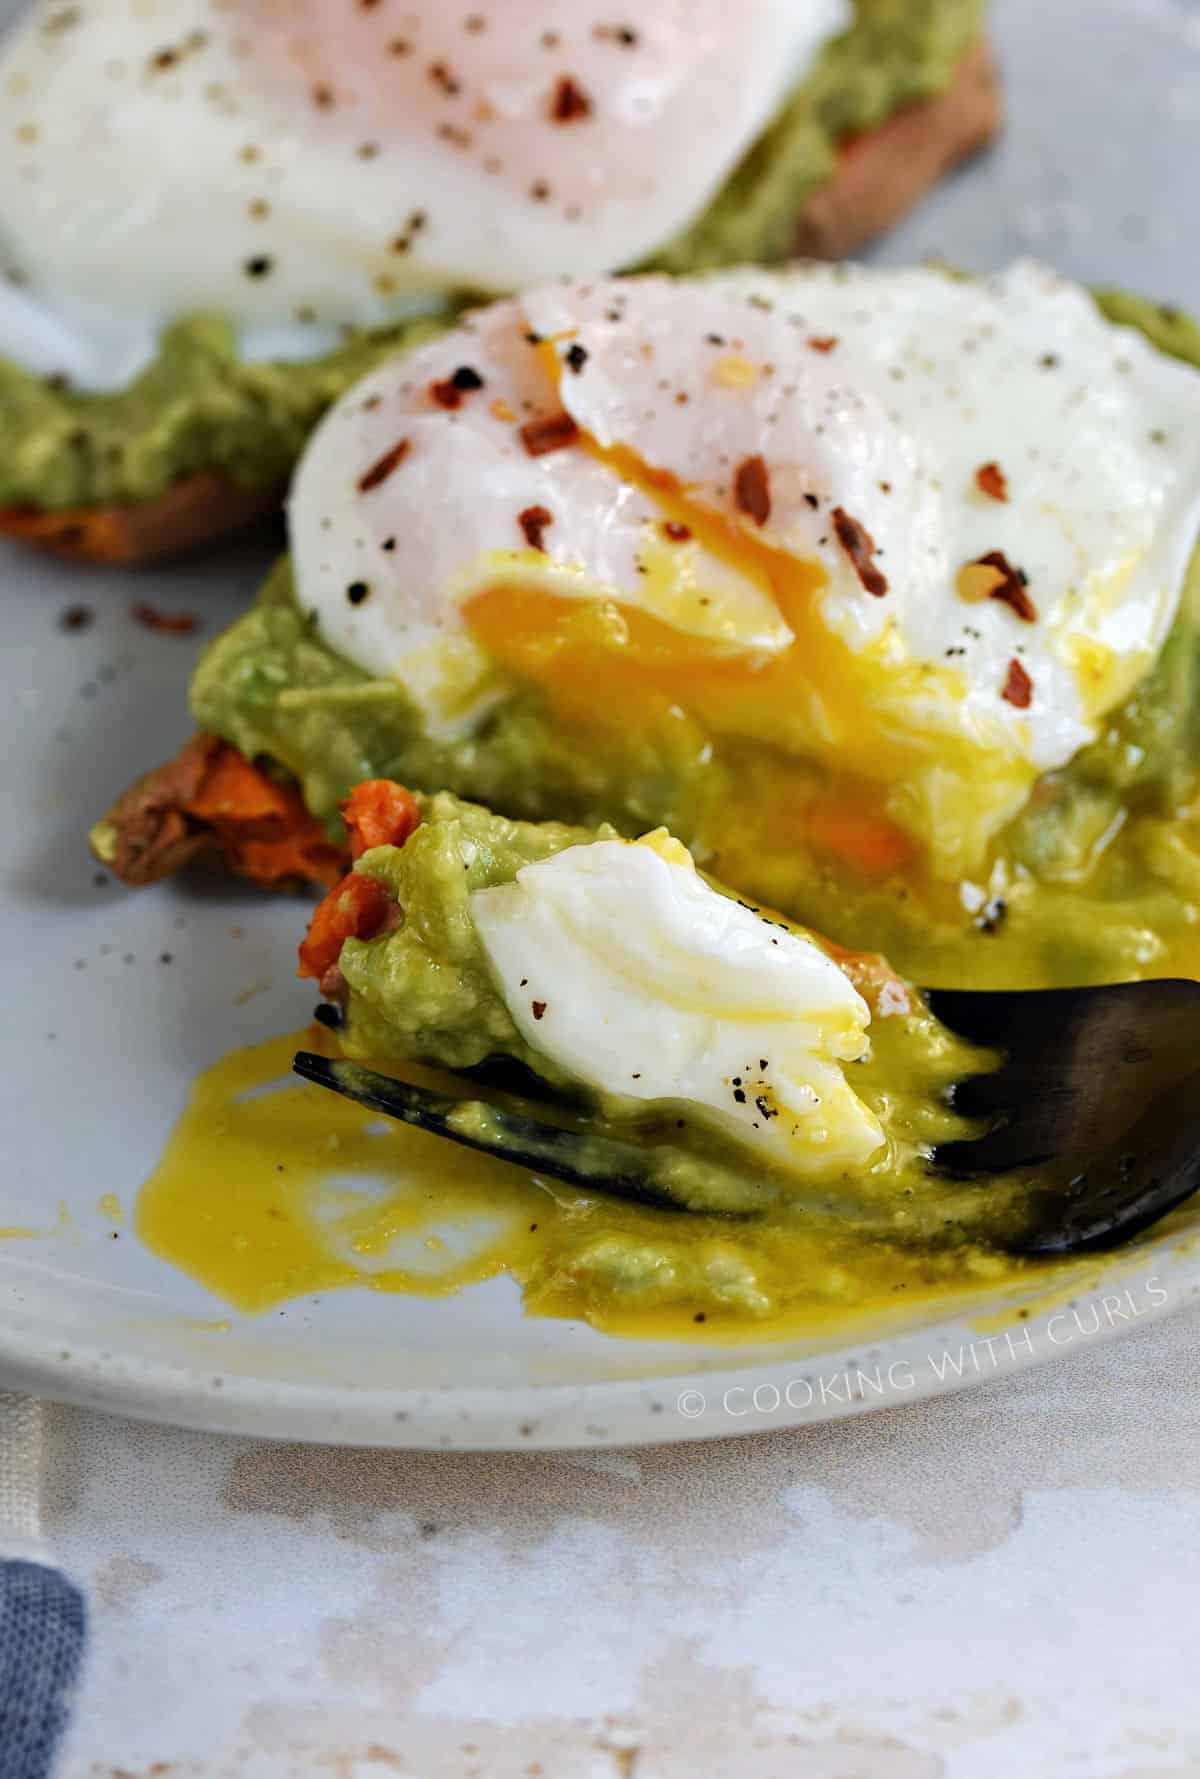 A fork sliced through the poached egg, avocado, and sweet potato and resting on a plate.